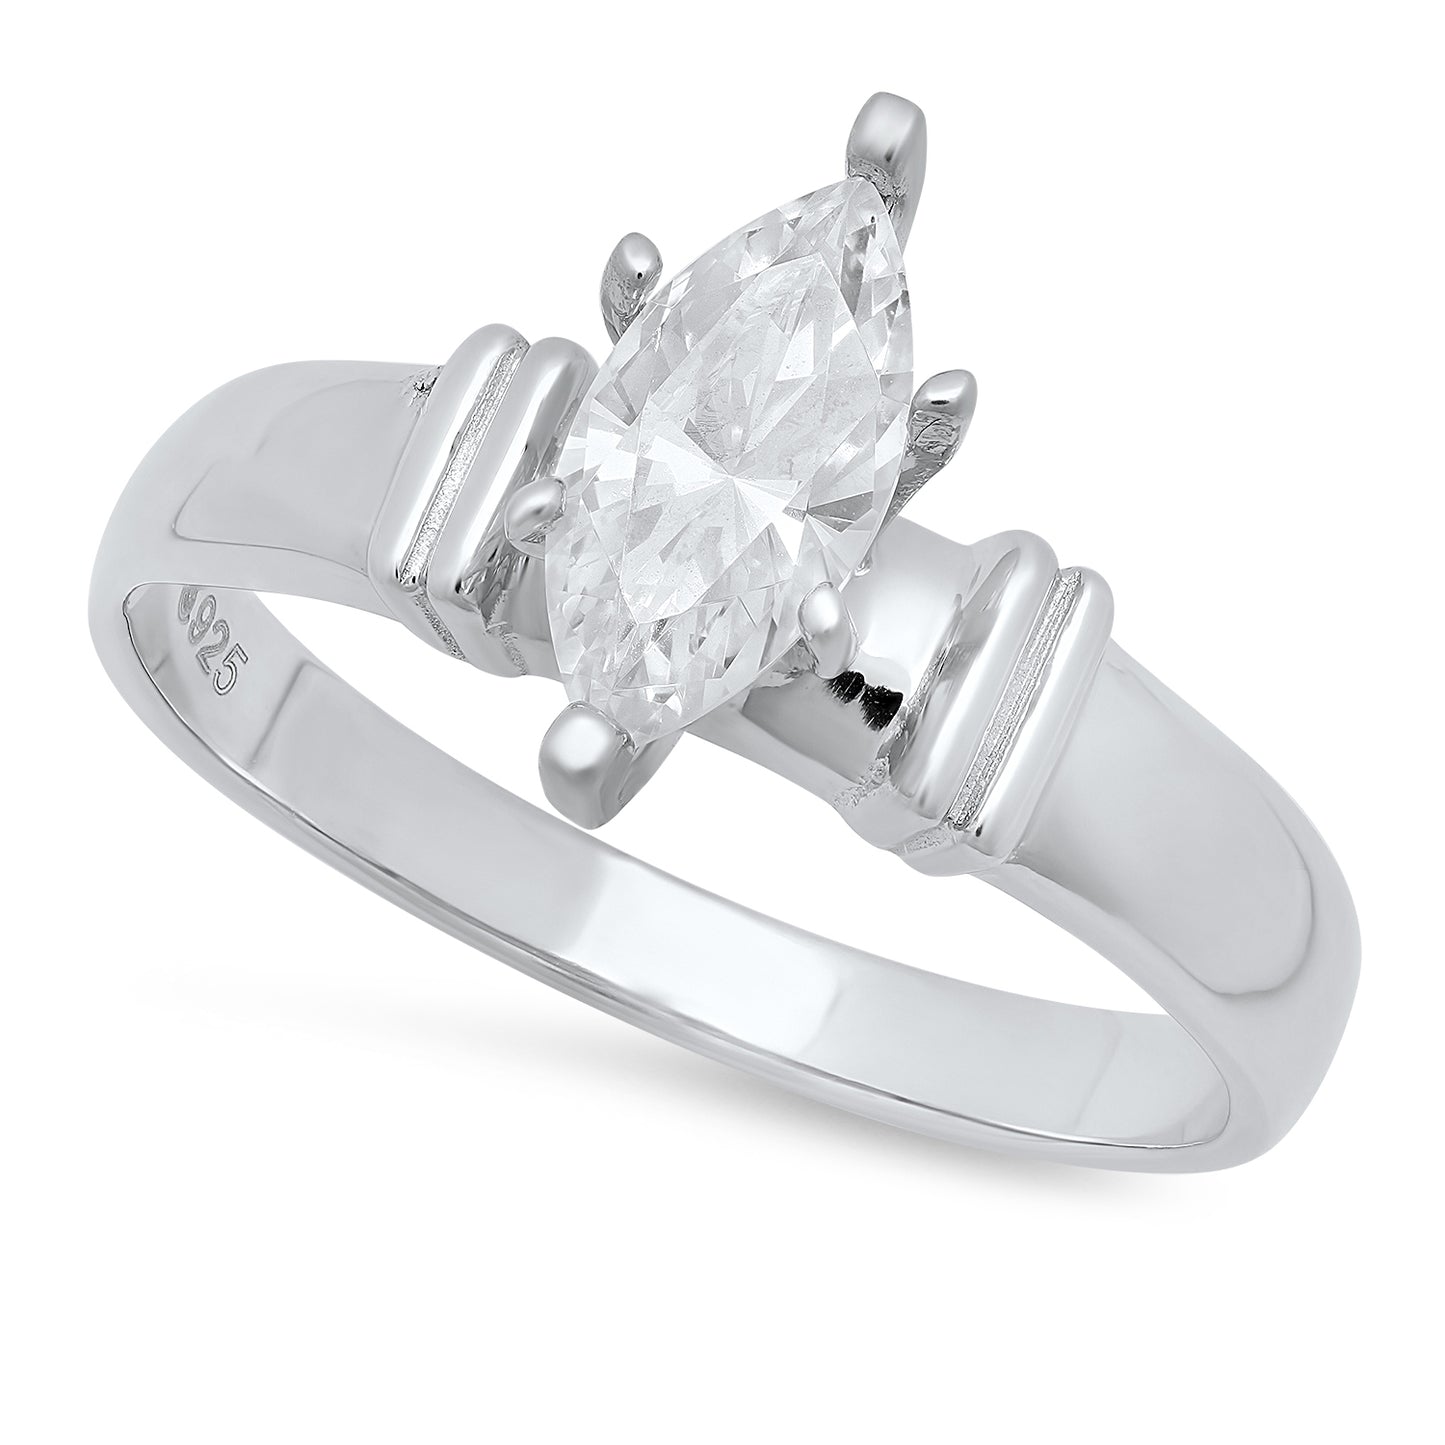 Marquise Cut CZ Solitaire 4.4mm Pure Sterling Silver Italian Crafted Engagement Ring + Polishing Cloth (SKU: SS-RN1027)